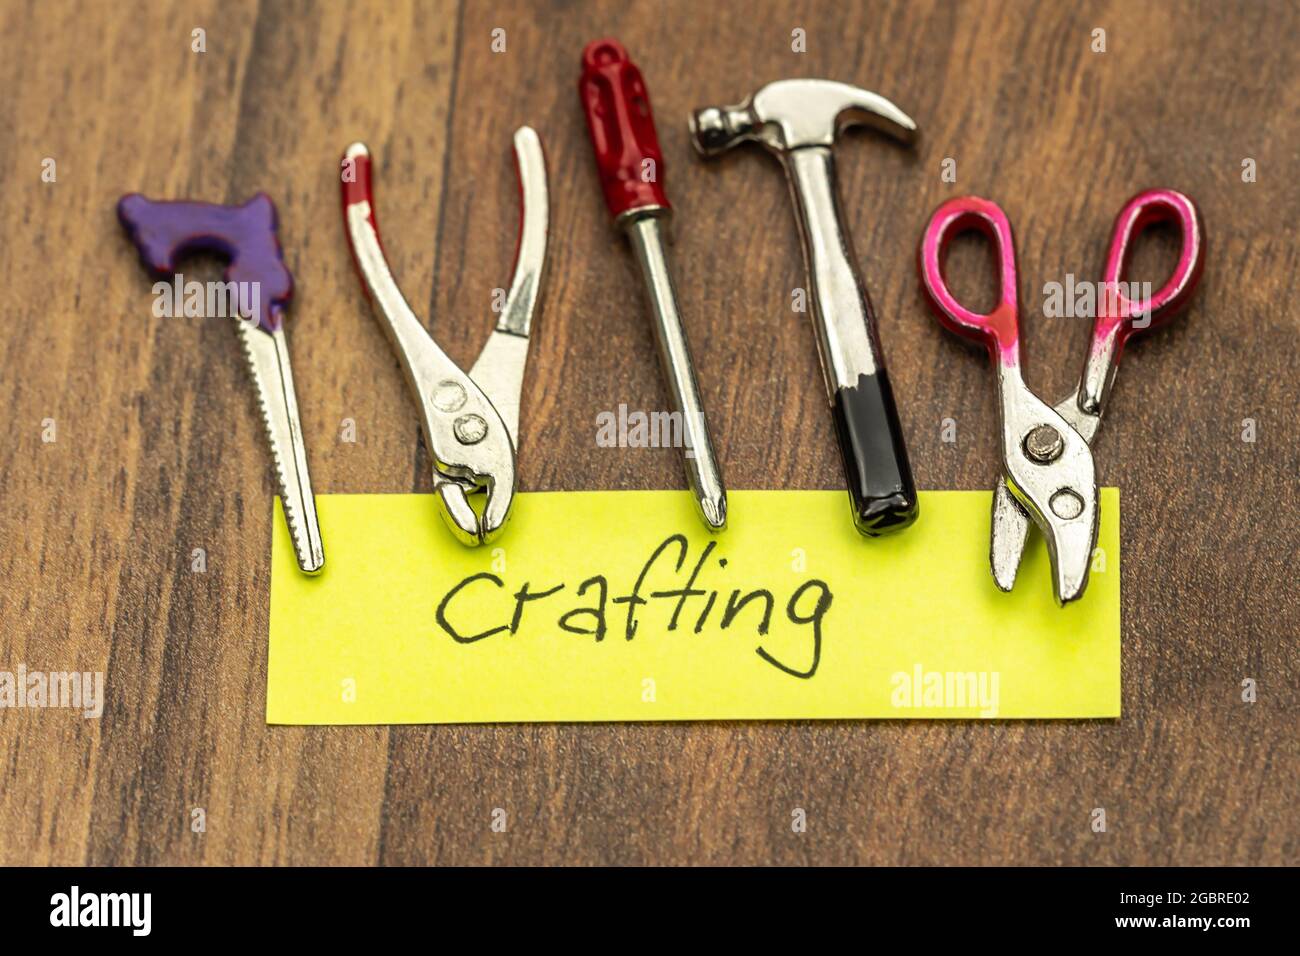 Crafting concept: Handwritten lettering "crafting" on a sticky note surrounded by miniature crafting tools Stock Photo